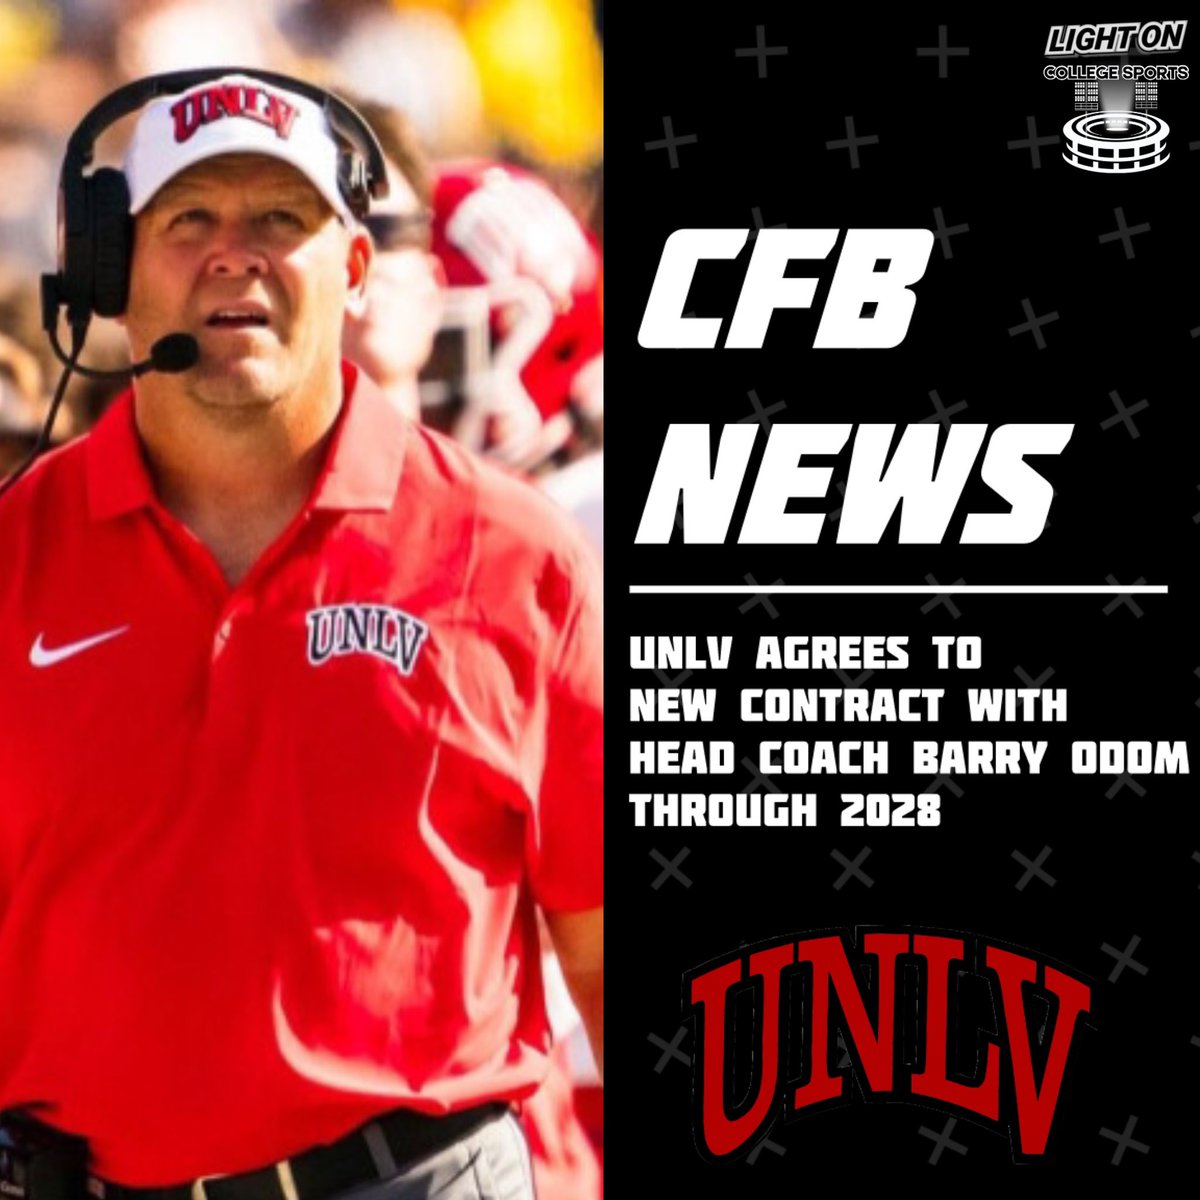 UNLV has agreed to a new contract with Head Coach Barry Odom, through 2028, per school release. This extension comes after Coach Odom led the Rebels to a 9-3 regular season record and Mountain West Championship appearance during his 1st season at UNLV in 2023. 📸: @unlvfootball